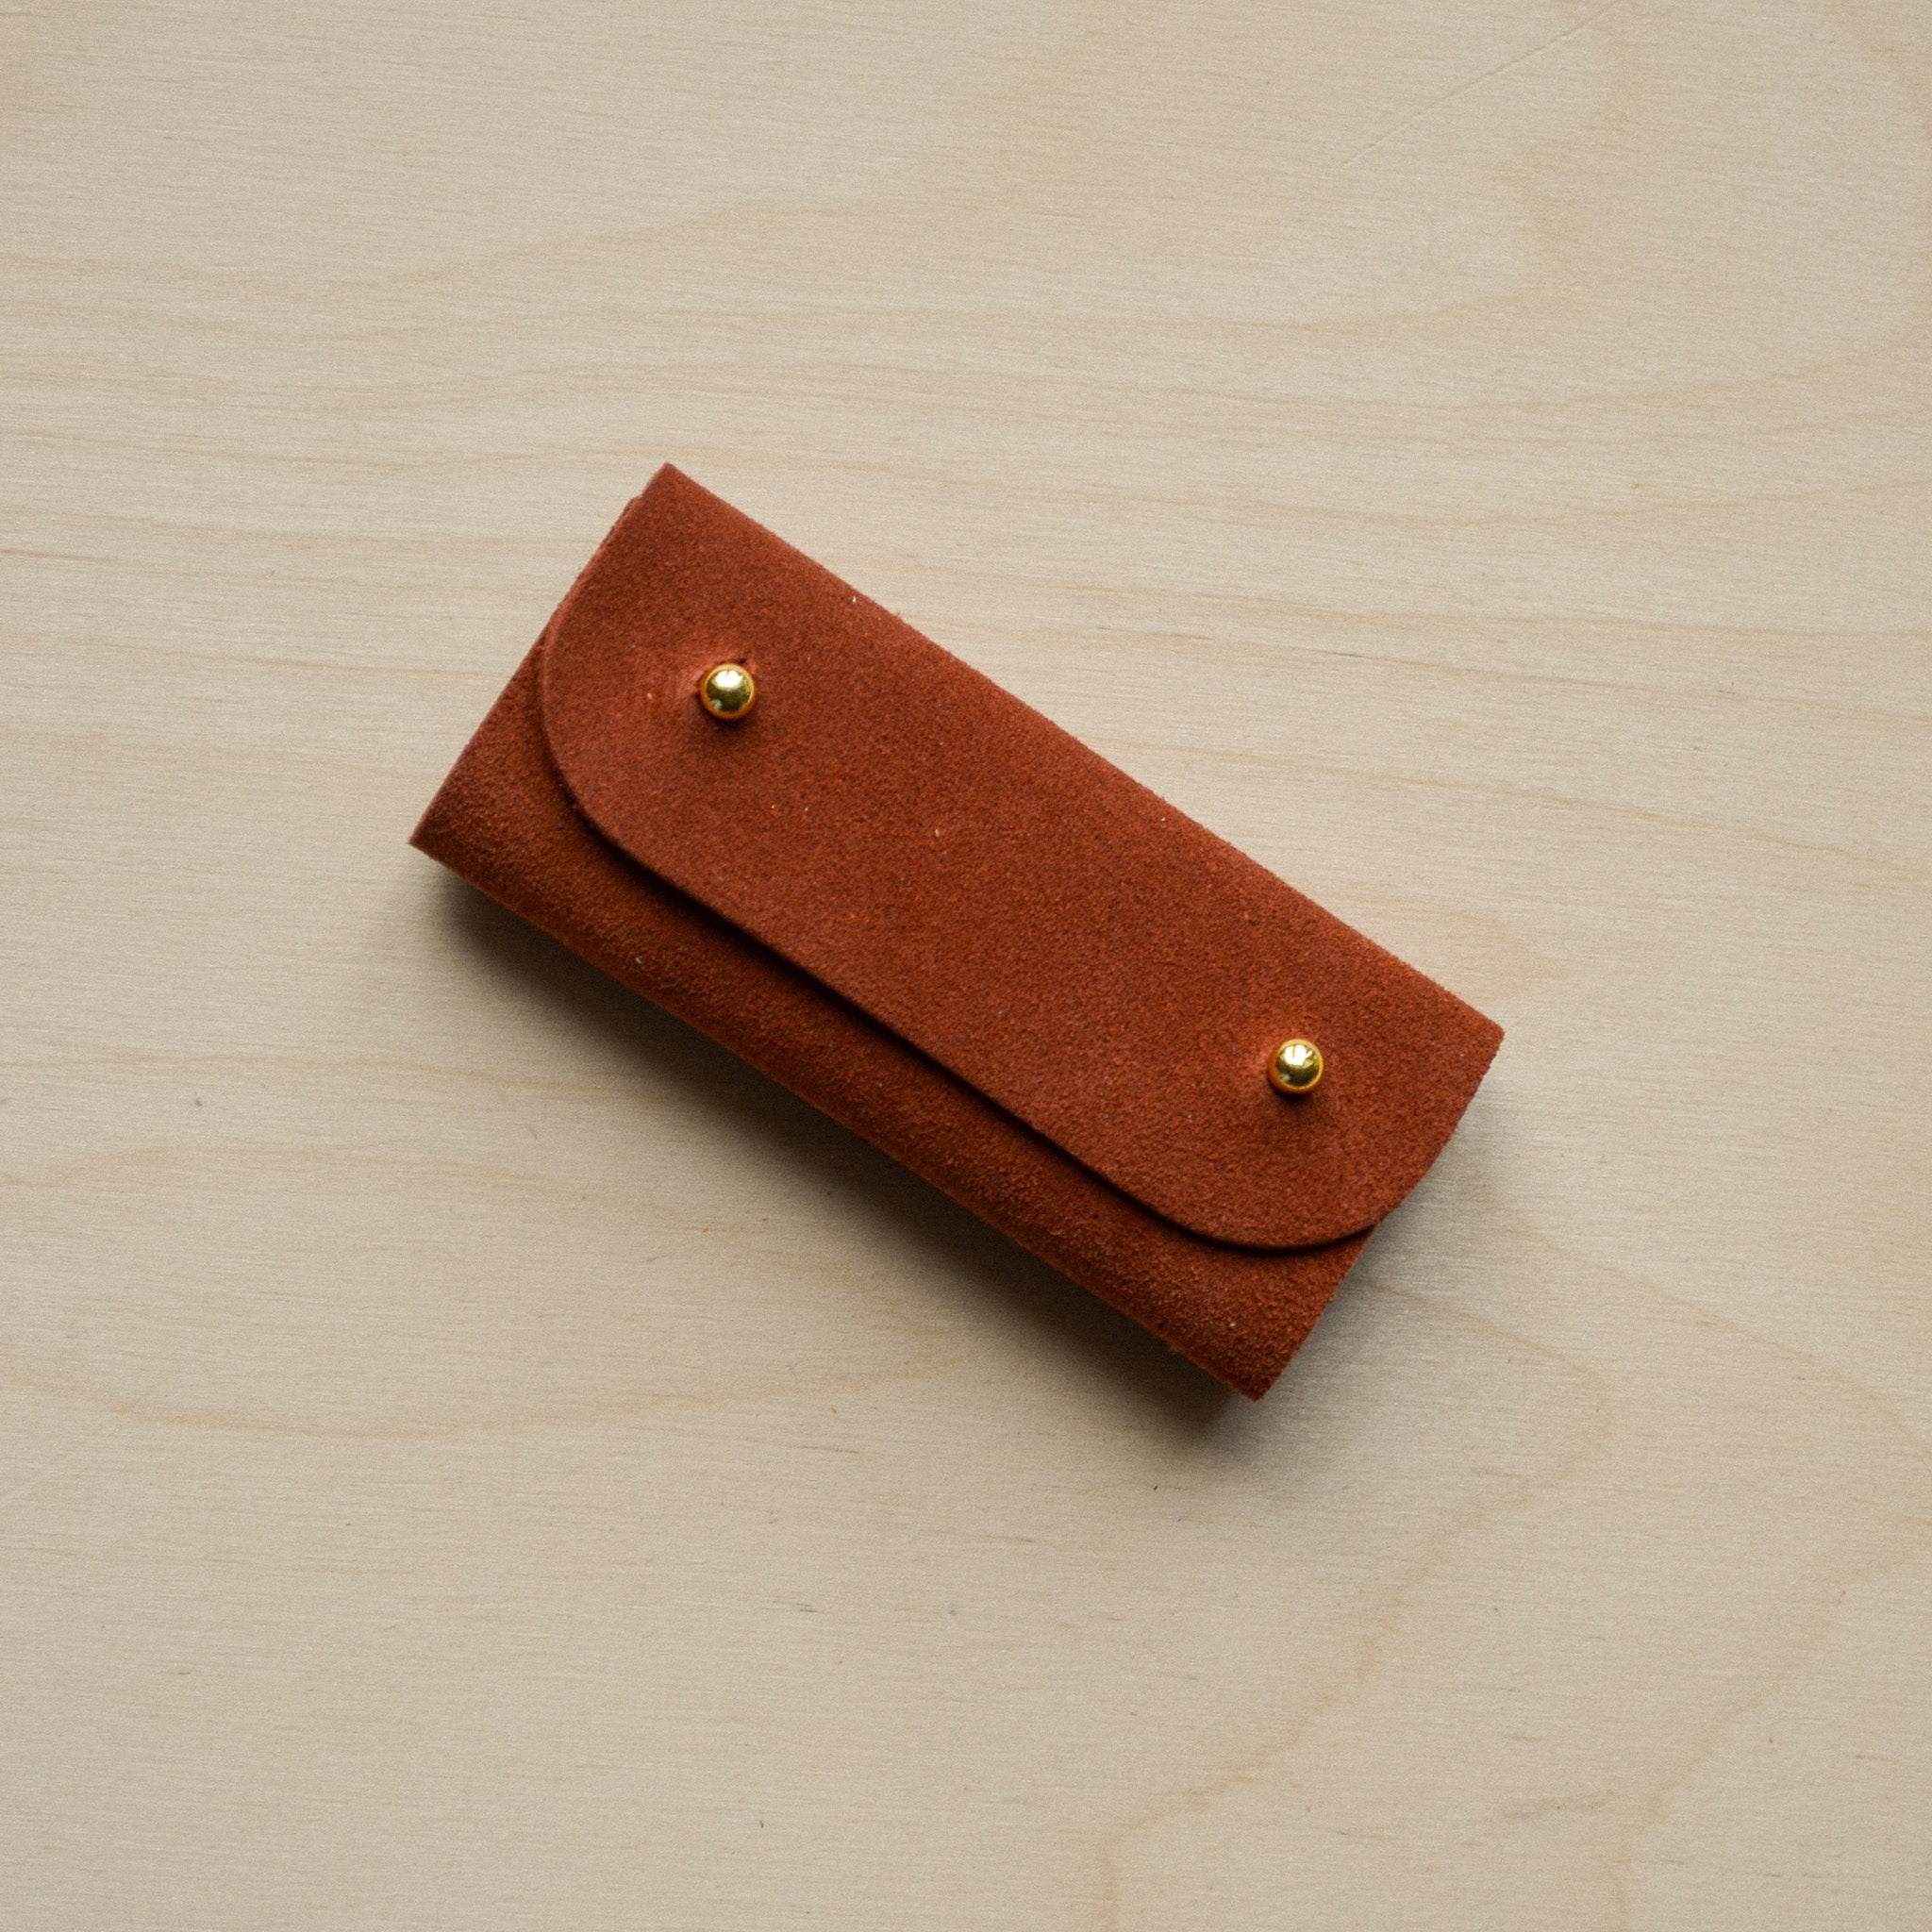 Chestnut Brown Suede Sewing Needle Case.